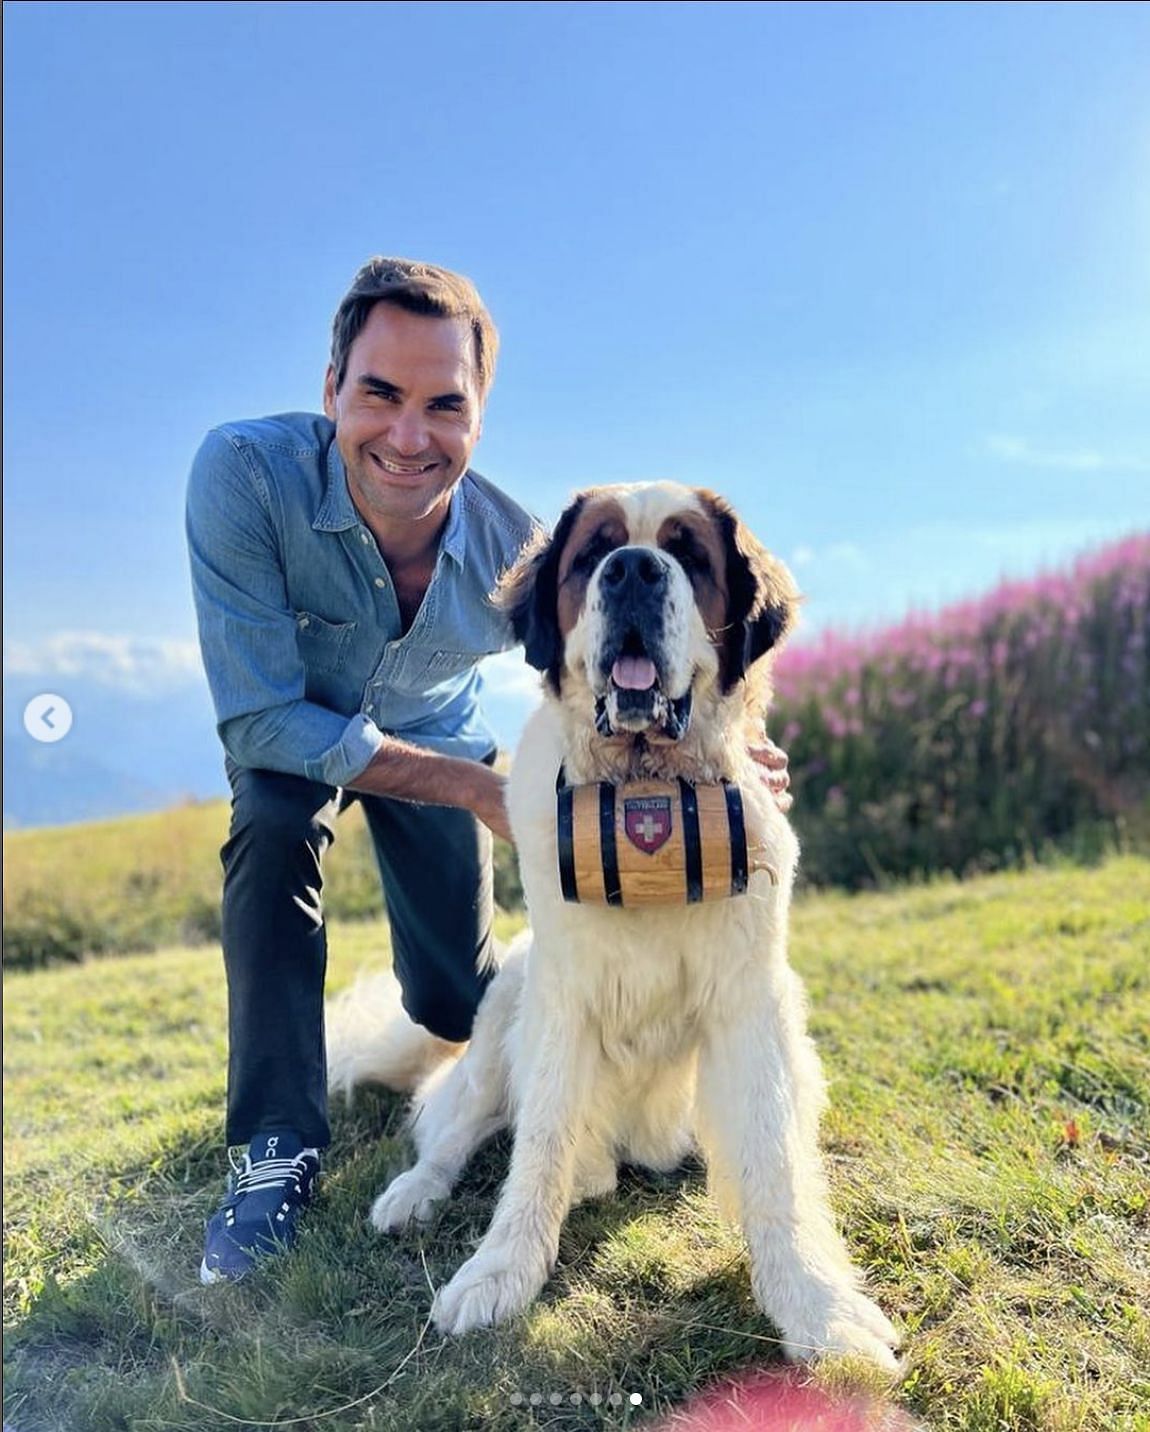 Roger Federer with another dog.